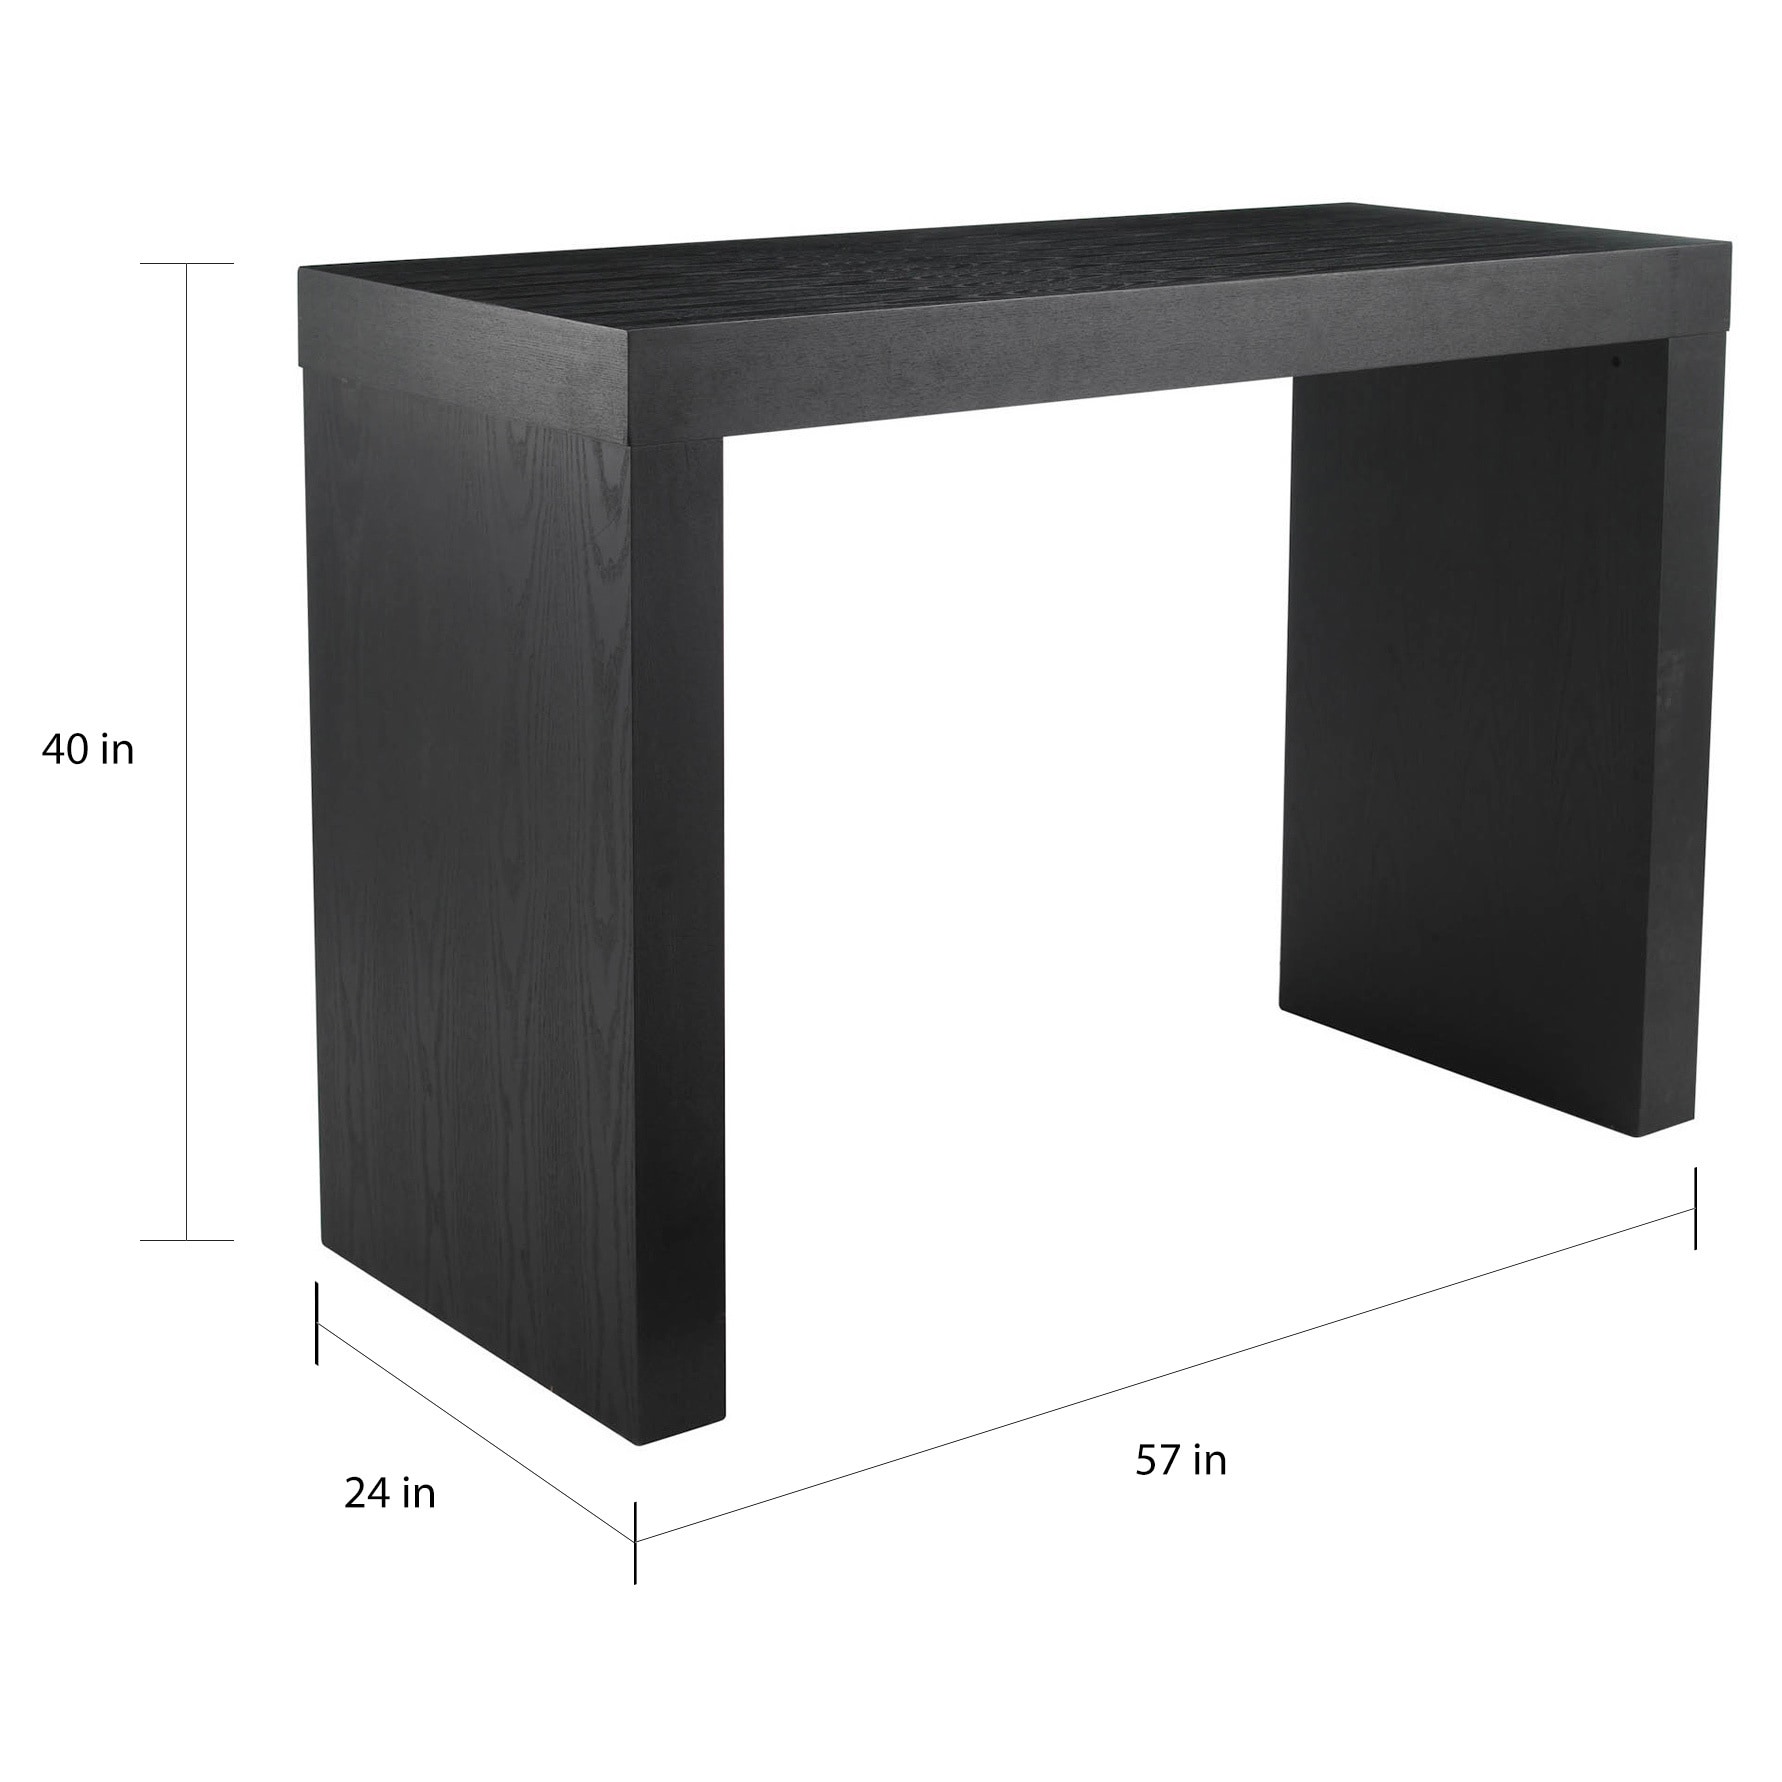 bar height tables dimensions at least 48 high